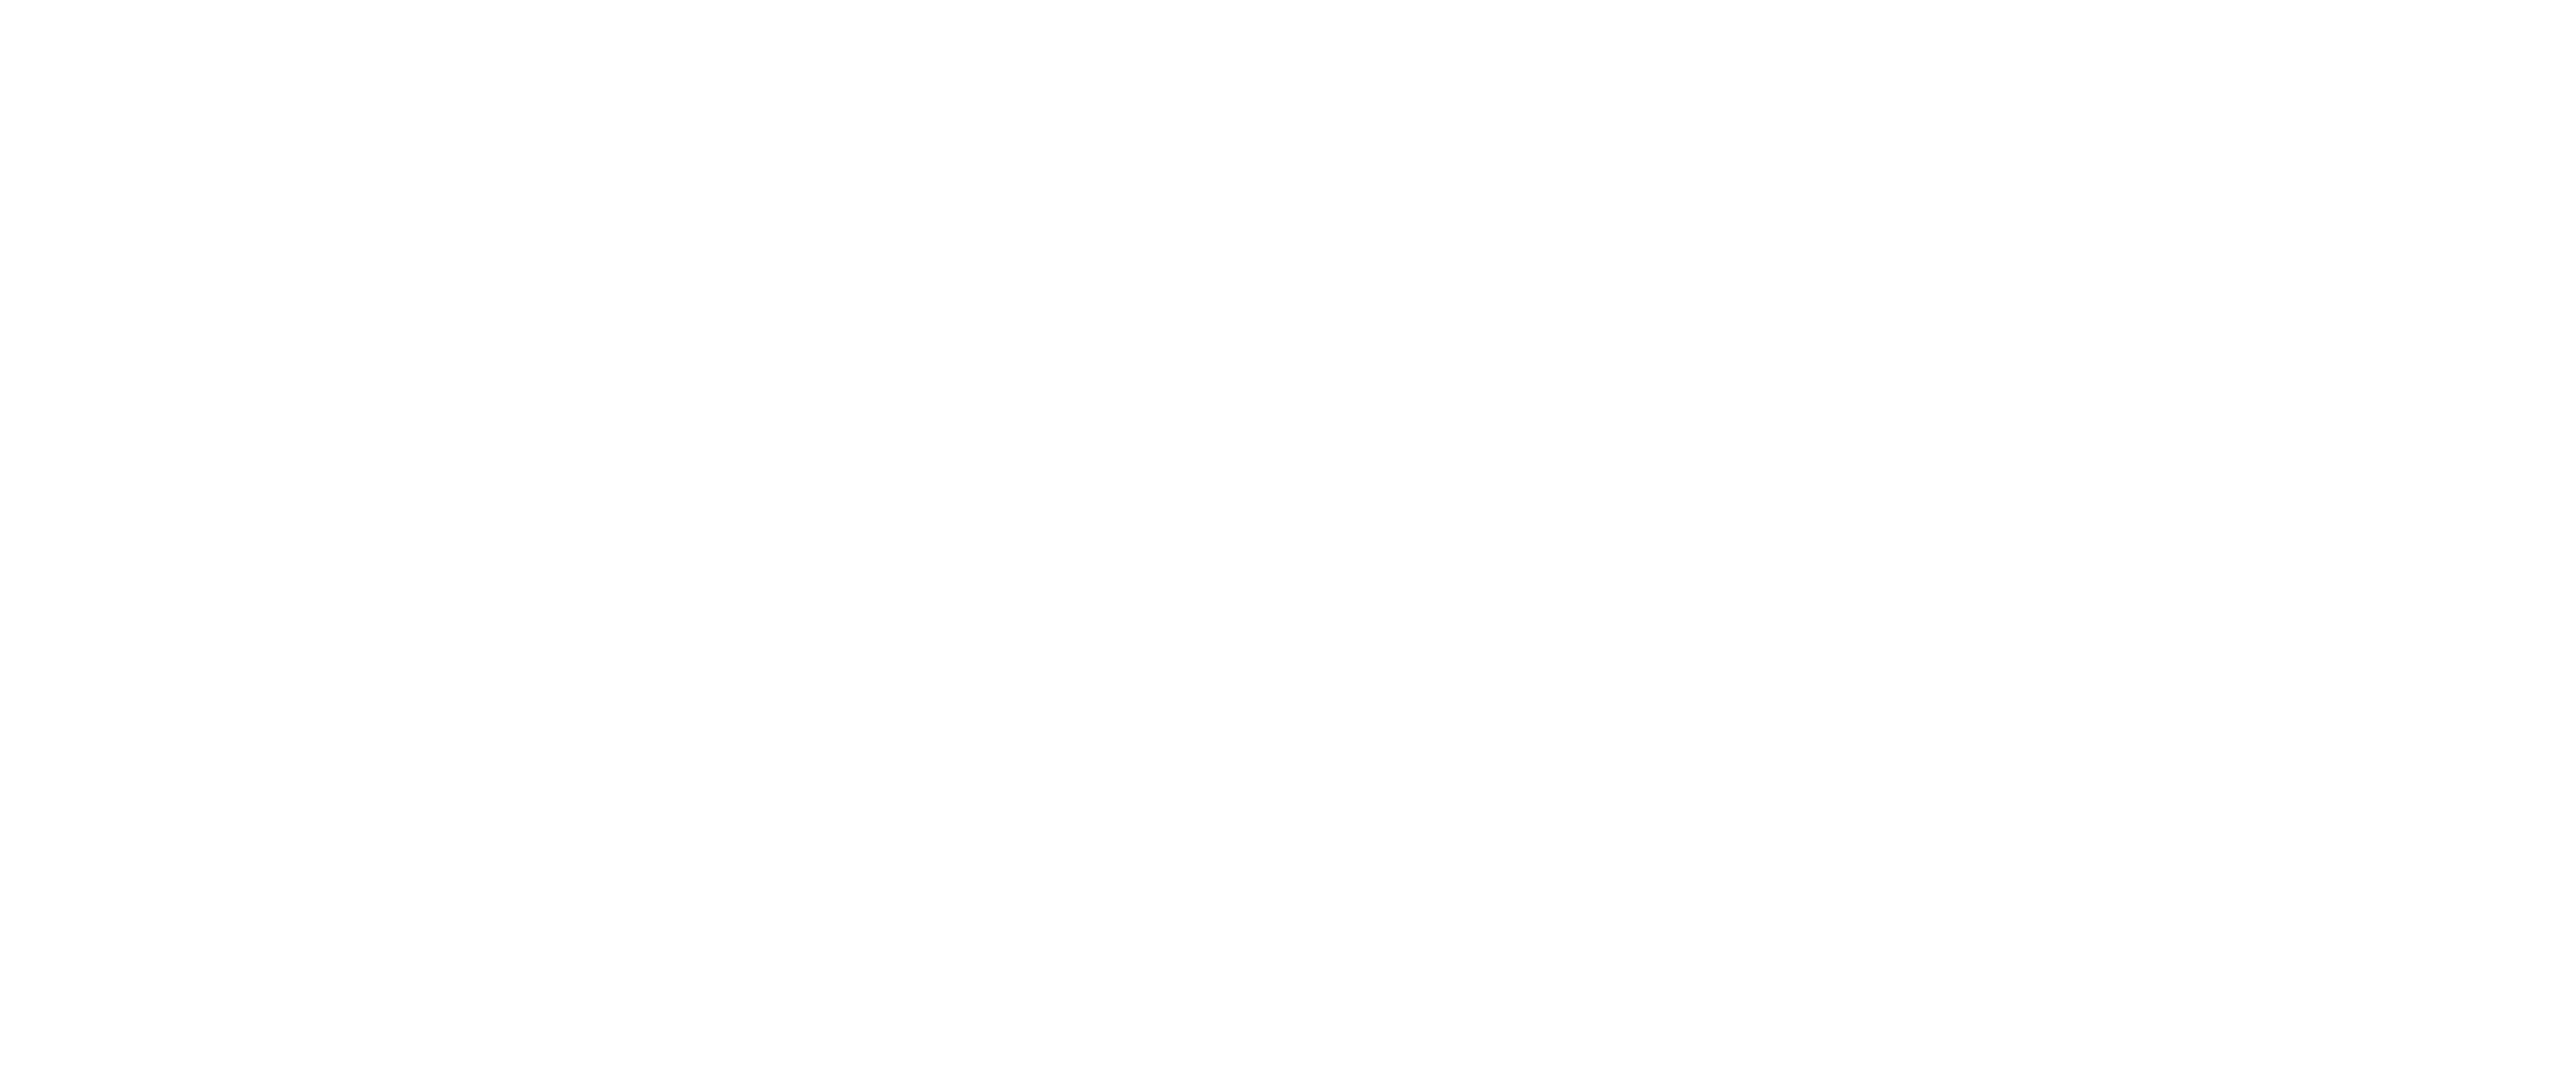 Locticians Community and Directory